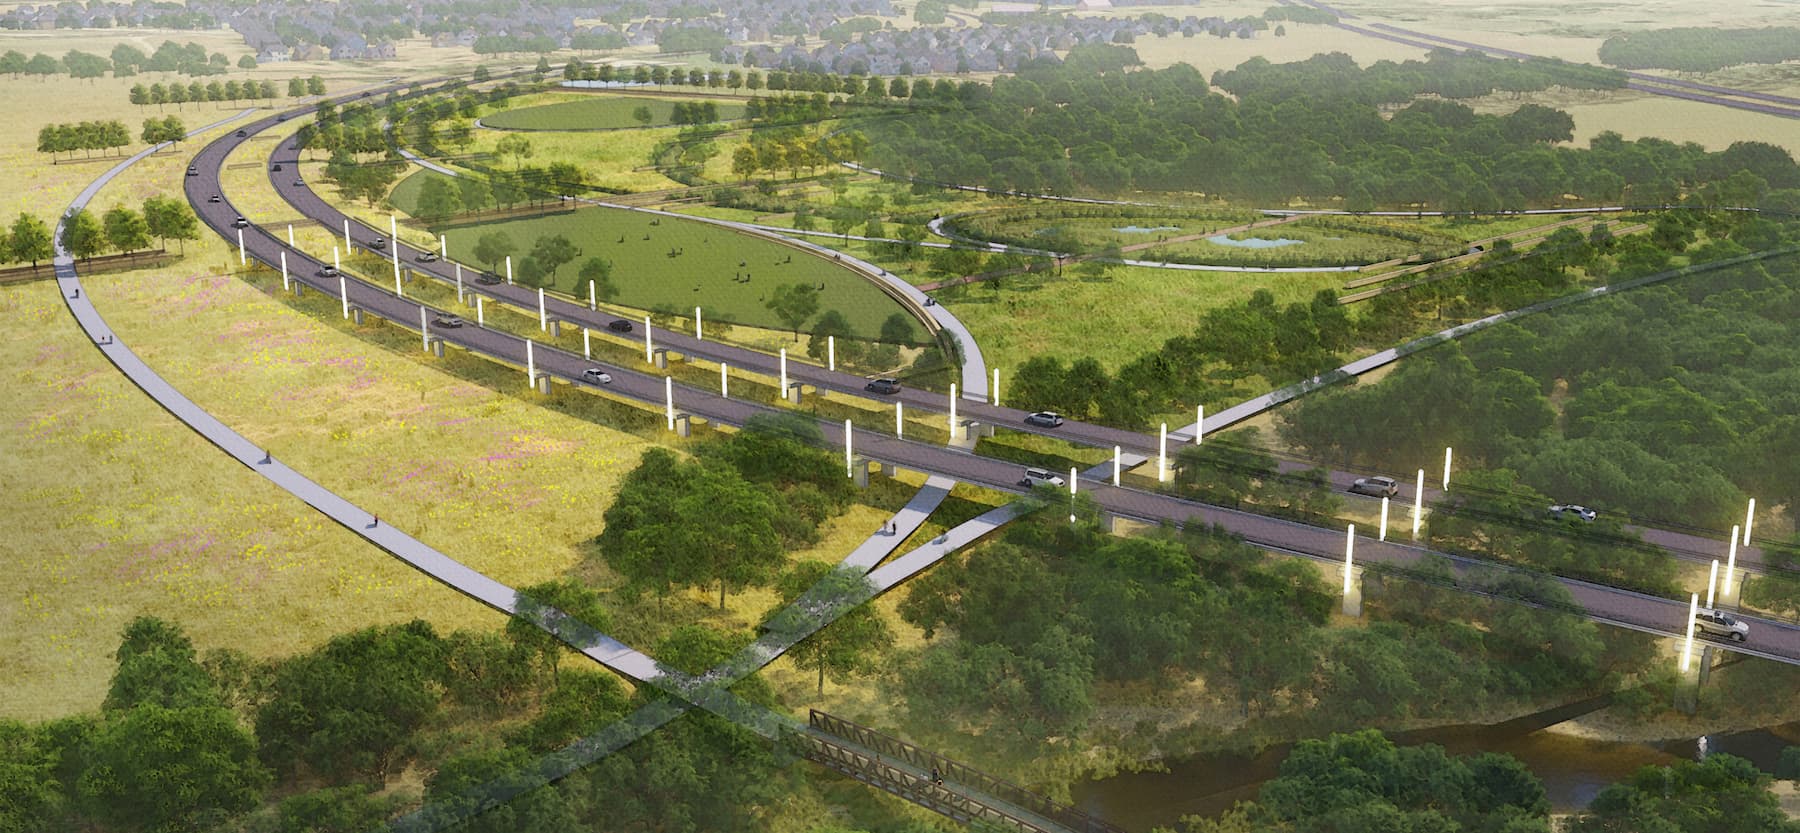 Aerial view of a wildlife overpass allowing animals to cross over a highway amidst green landscapes, near new home communities in Mansfield TX.